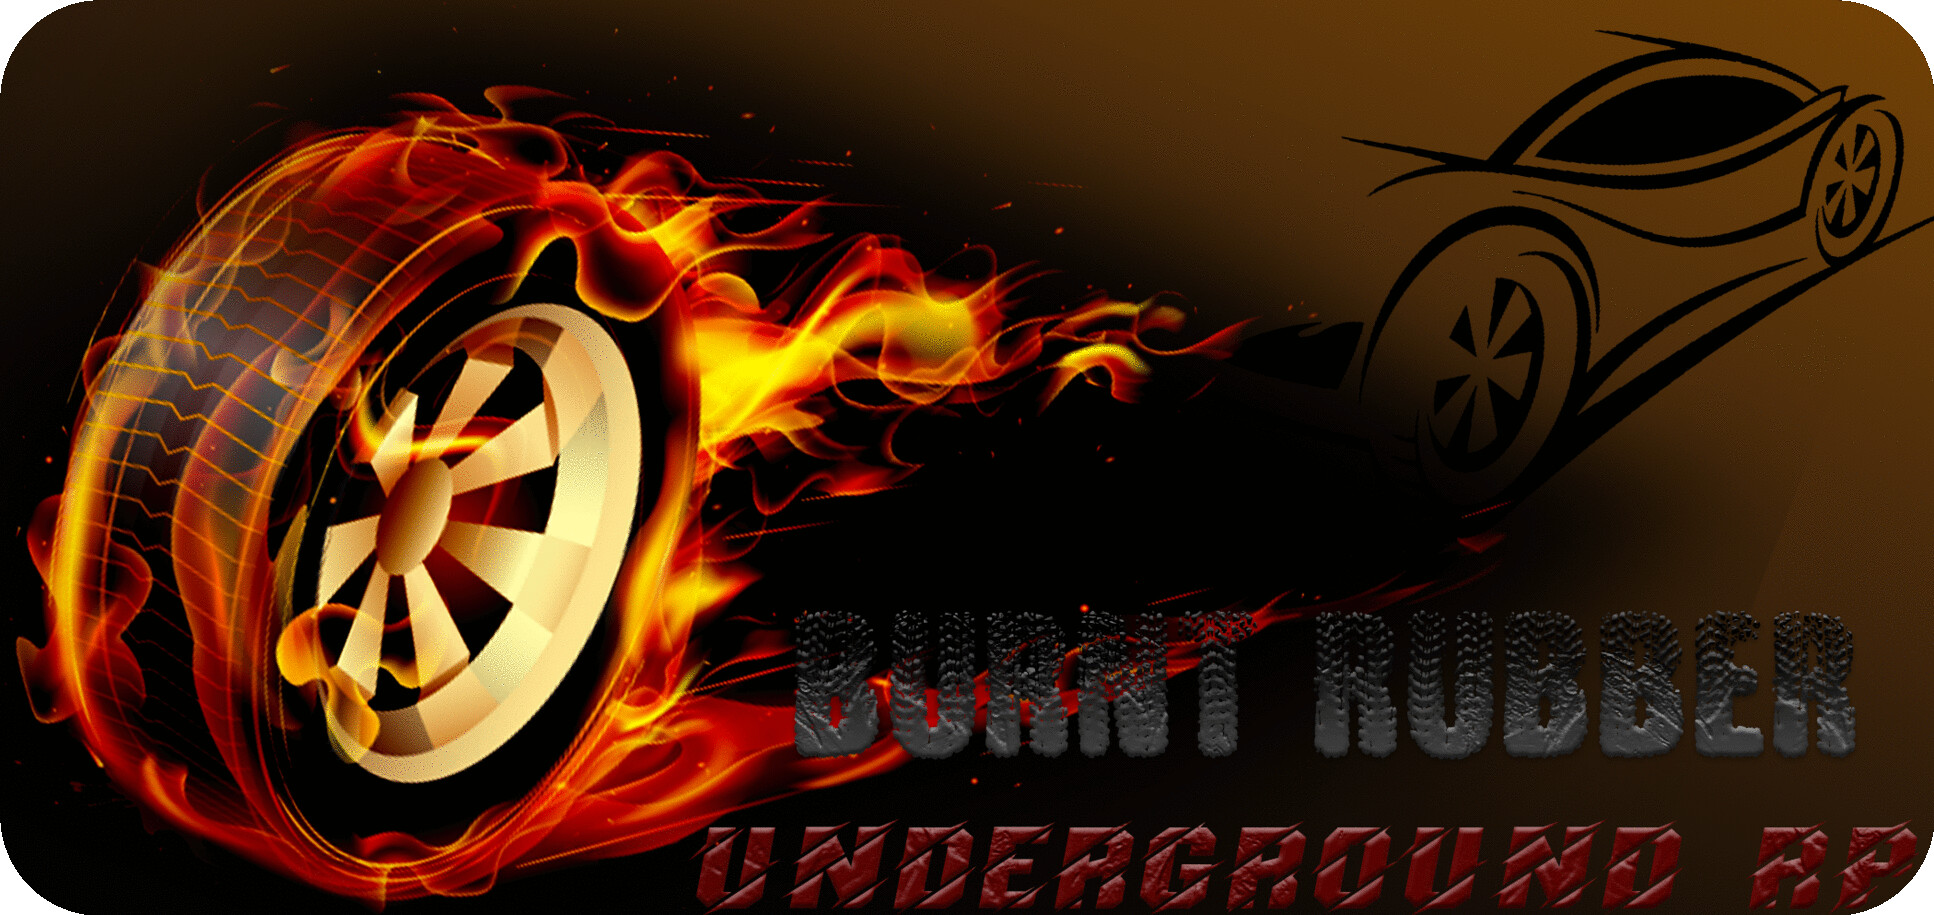 🛑 BurntRubberUnderground Roleplay, Seeking Police, Fire and EMS, plus  Business Owners, Gangs, Mechanics, Staff Positions